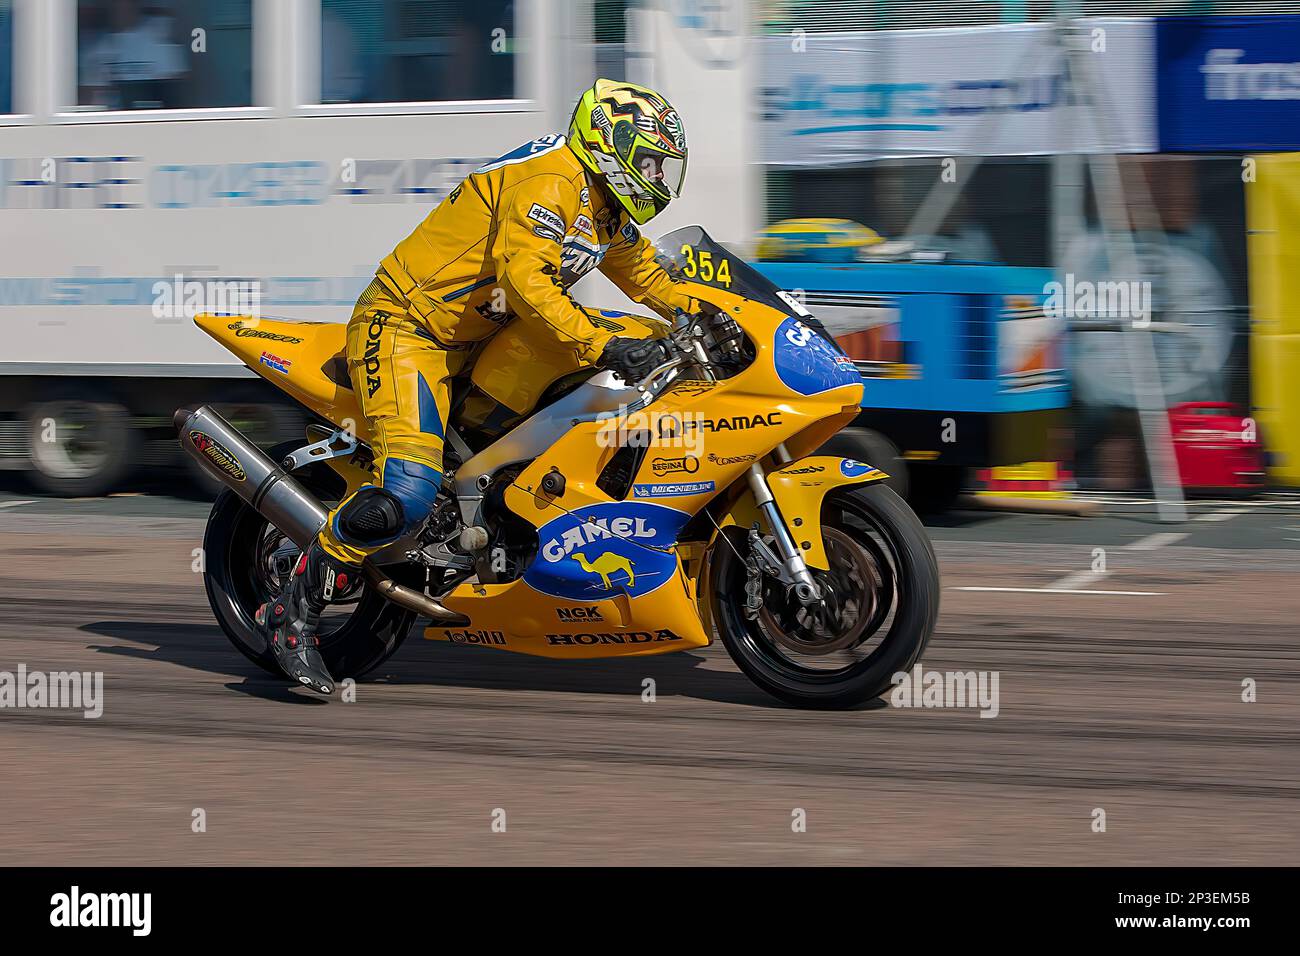 The event is currently run as a quarter mile sprint for both cars and motorcycles, held under the auspices of the Motor Sports Association. This image features Terence Grayer riding a Yamaha YZF-R1. The event is organised by the Brighton and Hove Motor Club run along Madeira Drive, Brighton Sea Front, City of Brighton & Hove, UK. 2nd September 2017 Stock Photo